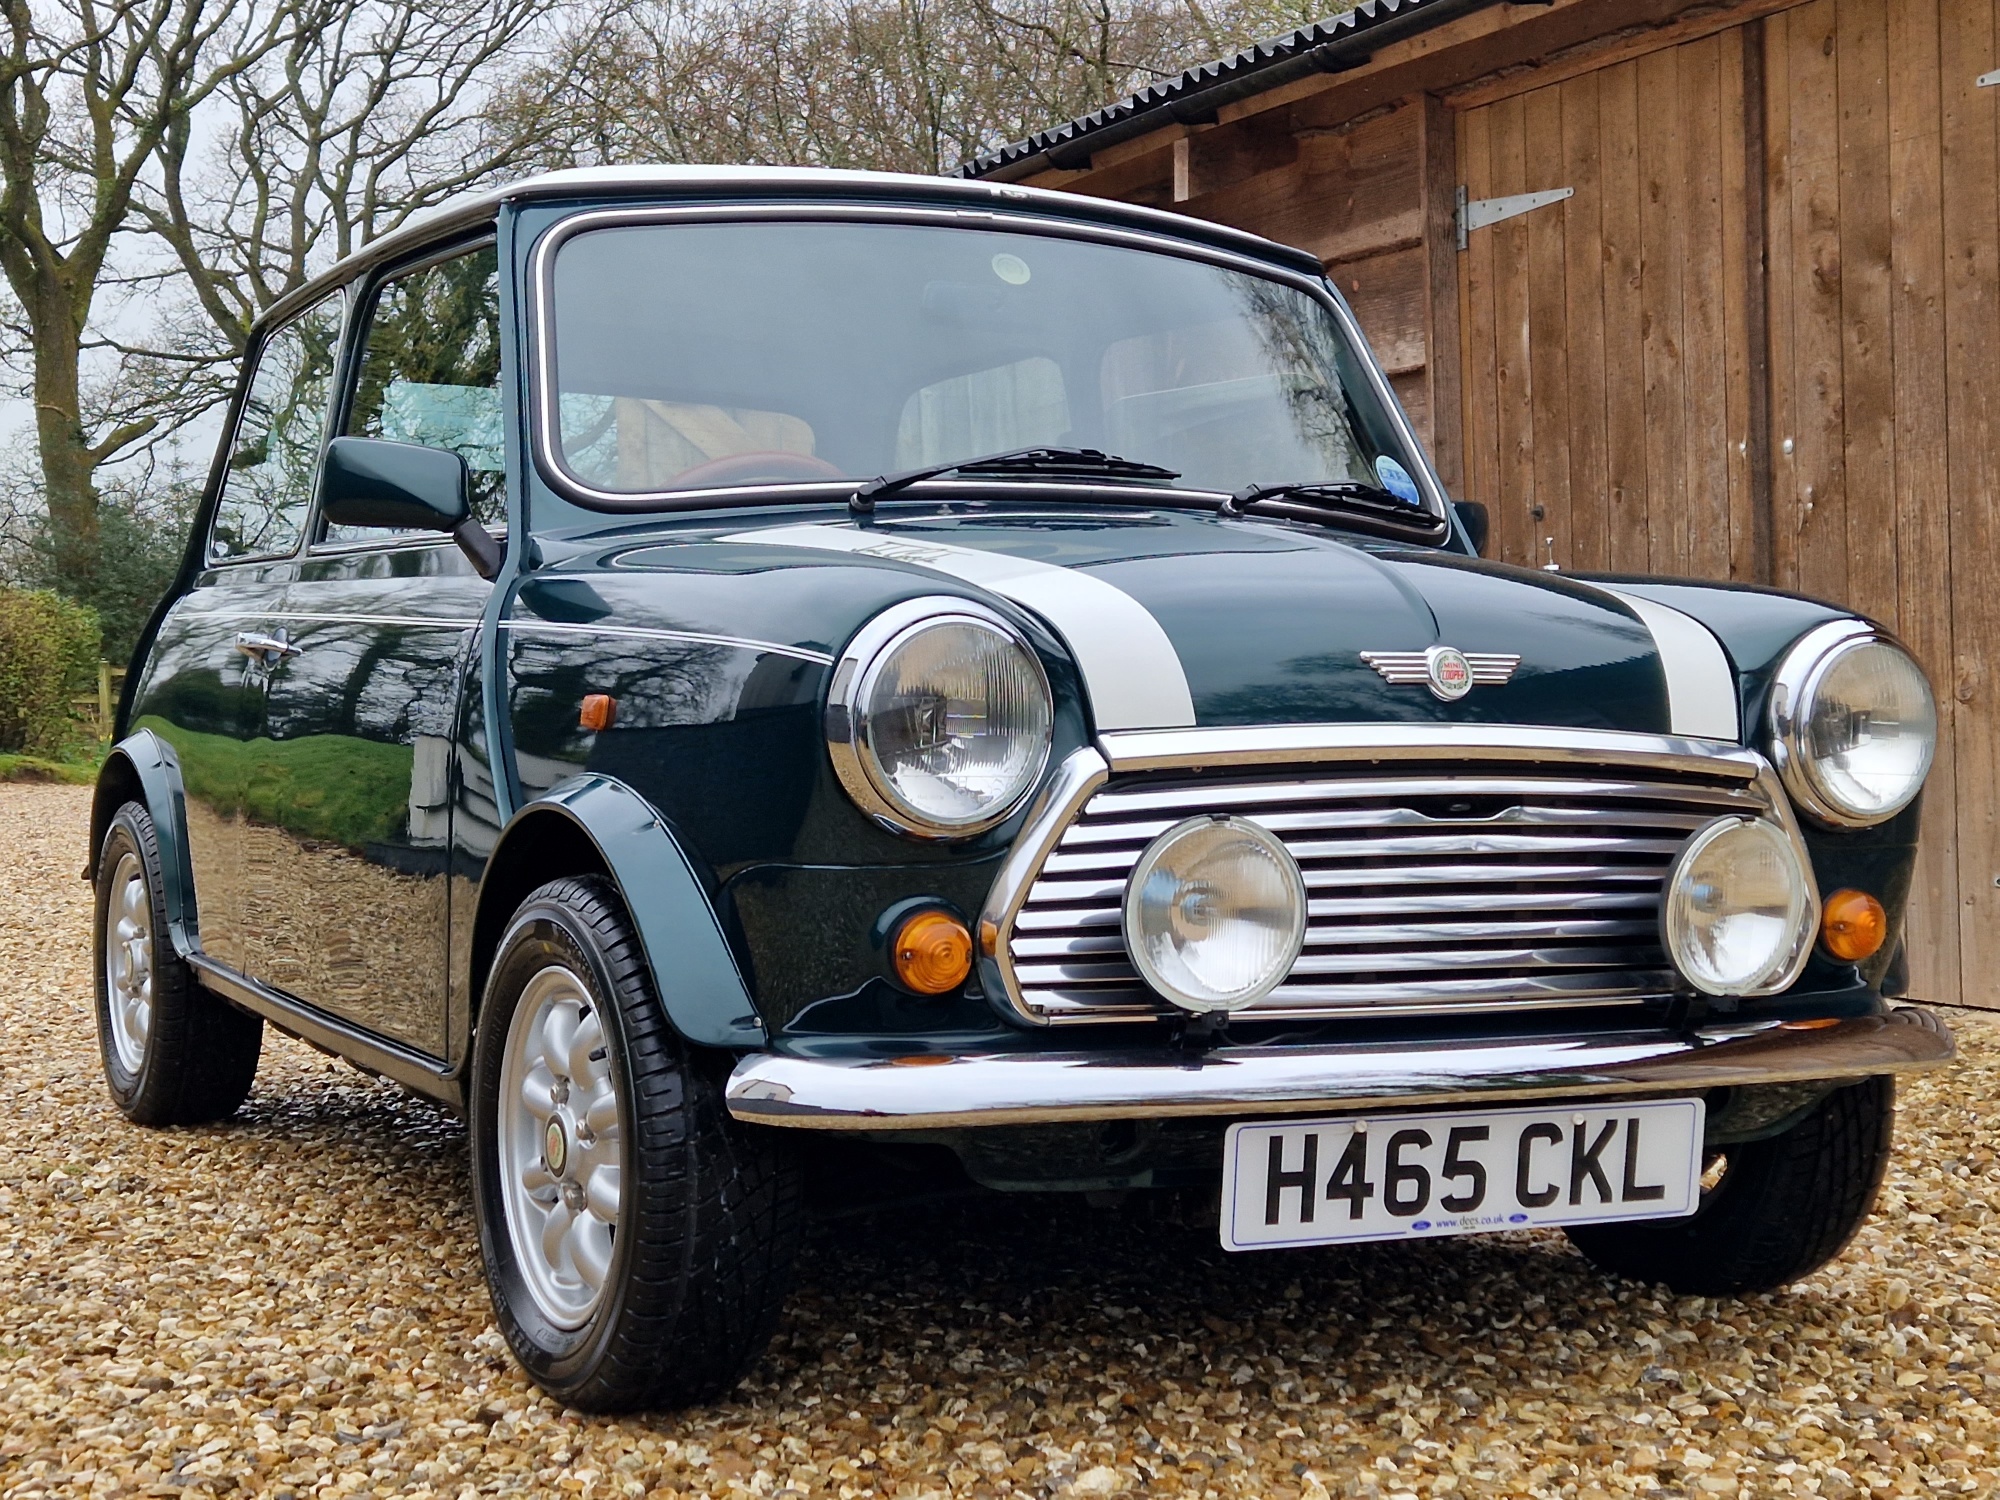 ** NOW SOLD ** Rover Mini Cooper RSP In British Racing Green And Just 23200 Miles in 33 Years!